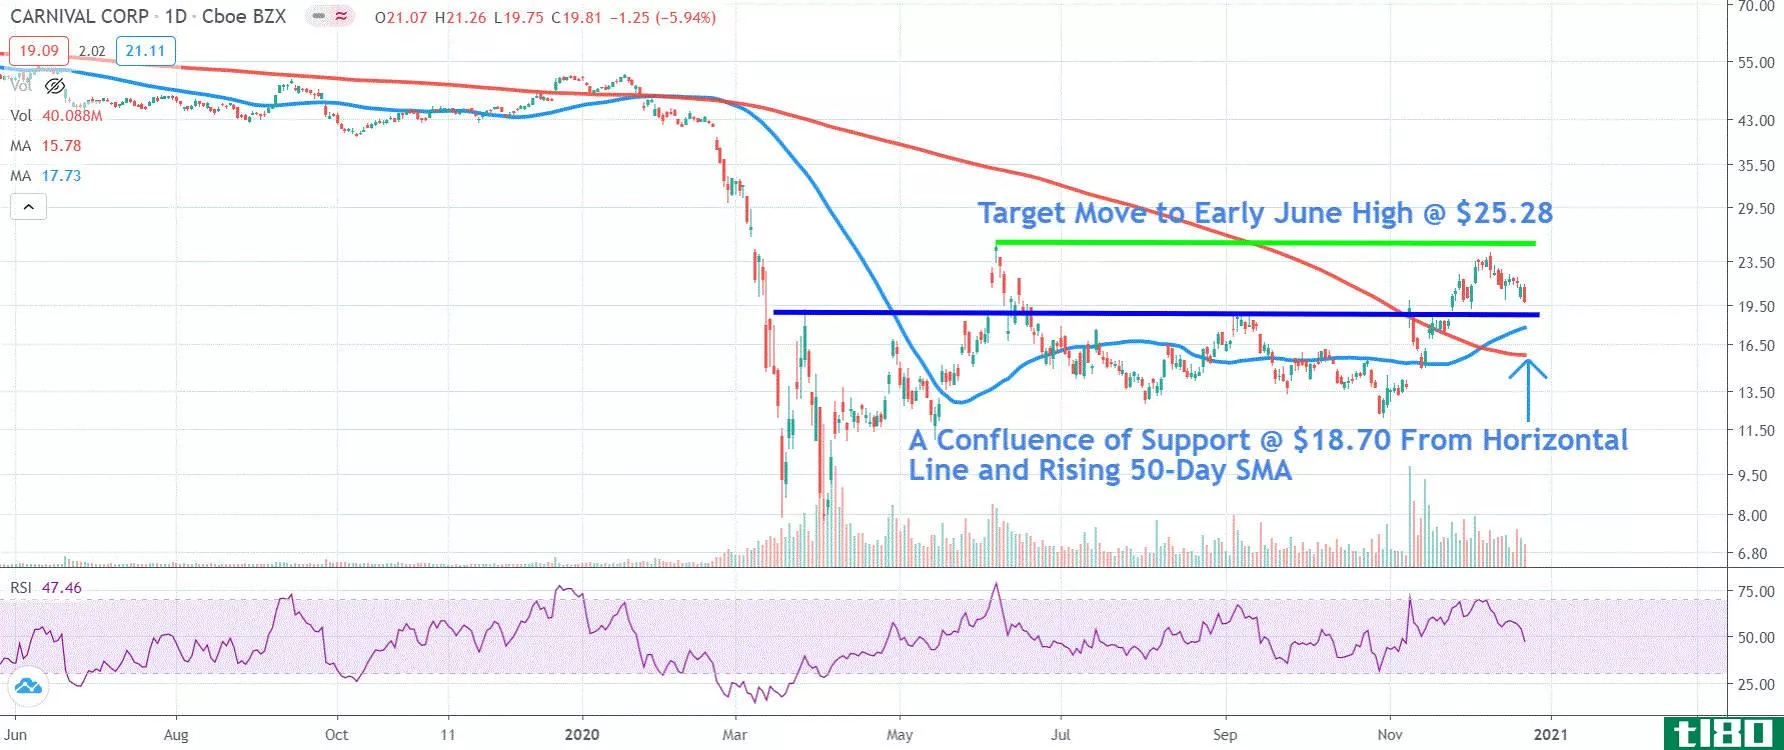 Chart depicting the share price of Carnival Corporation & Plc (CCL)